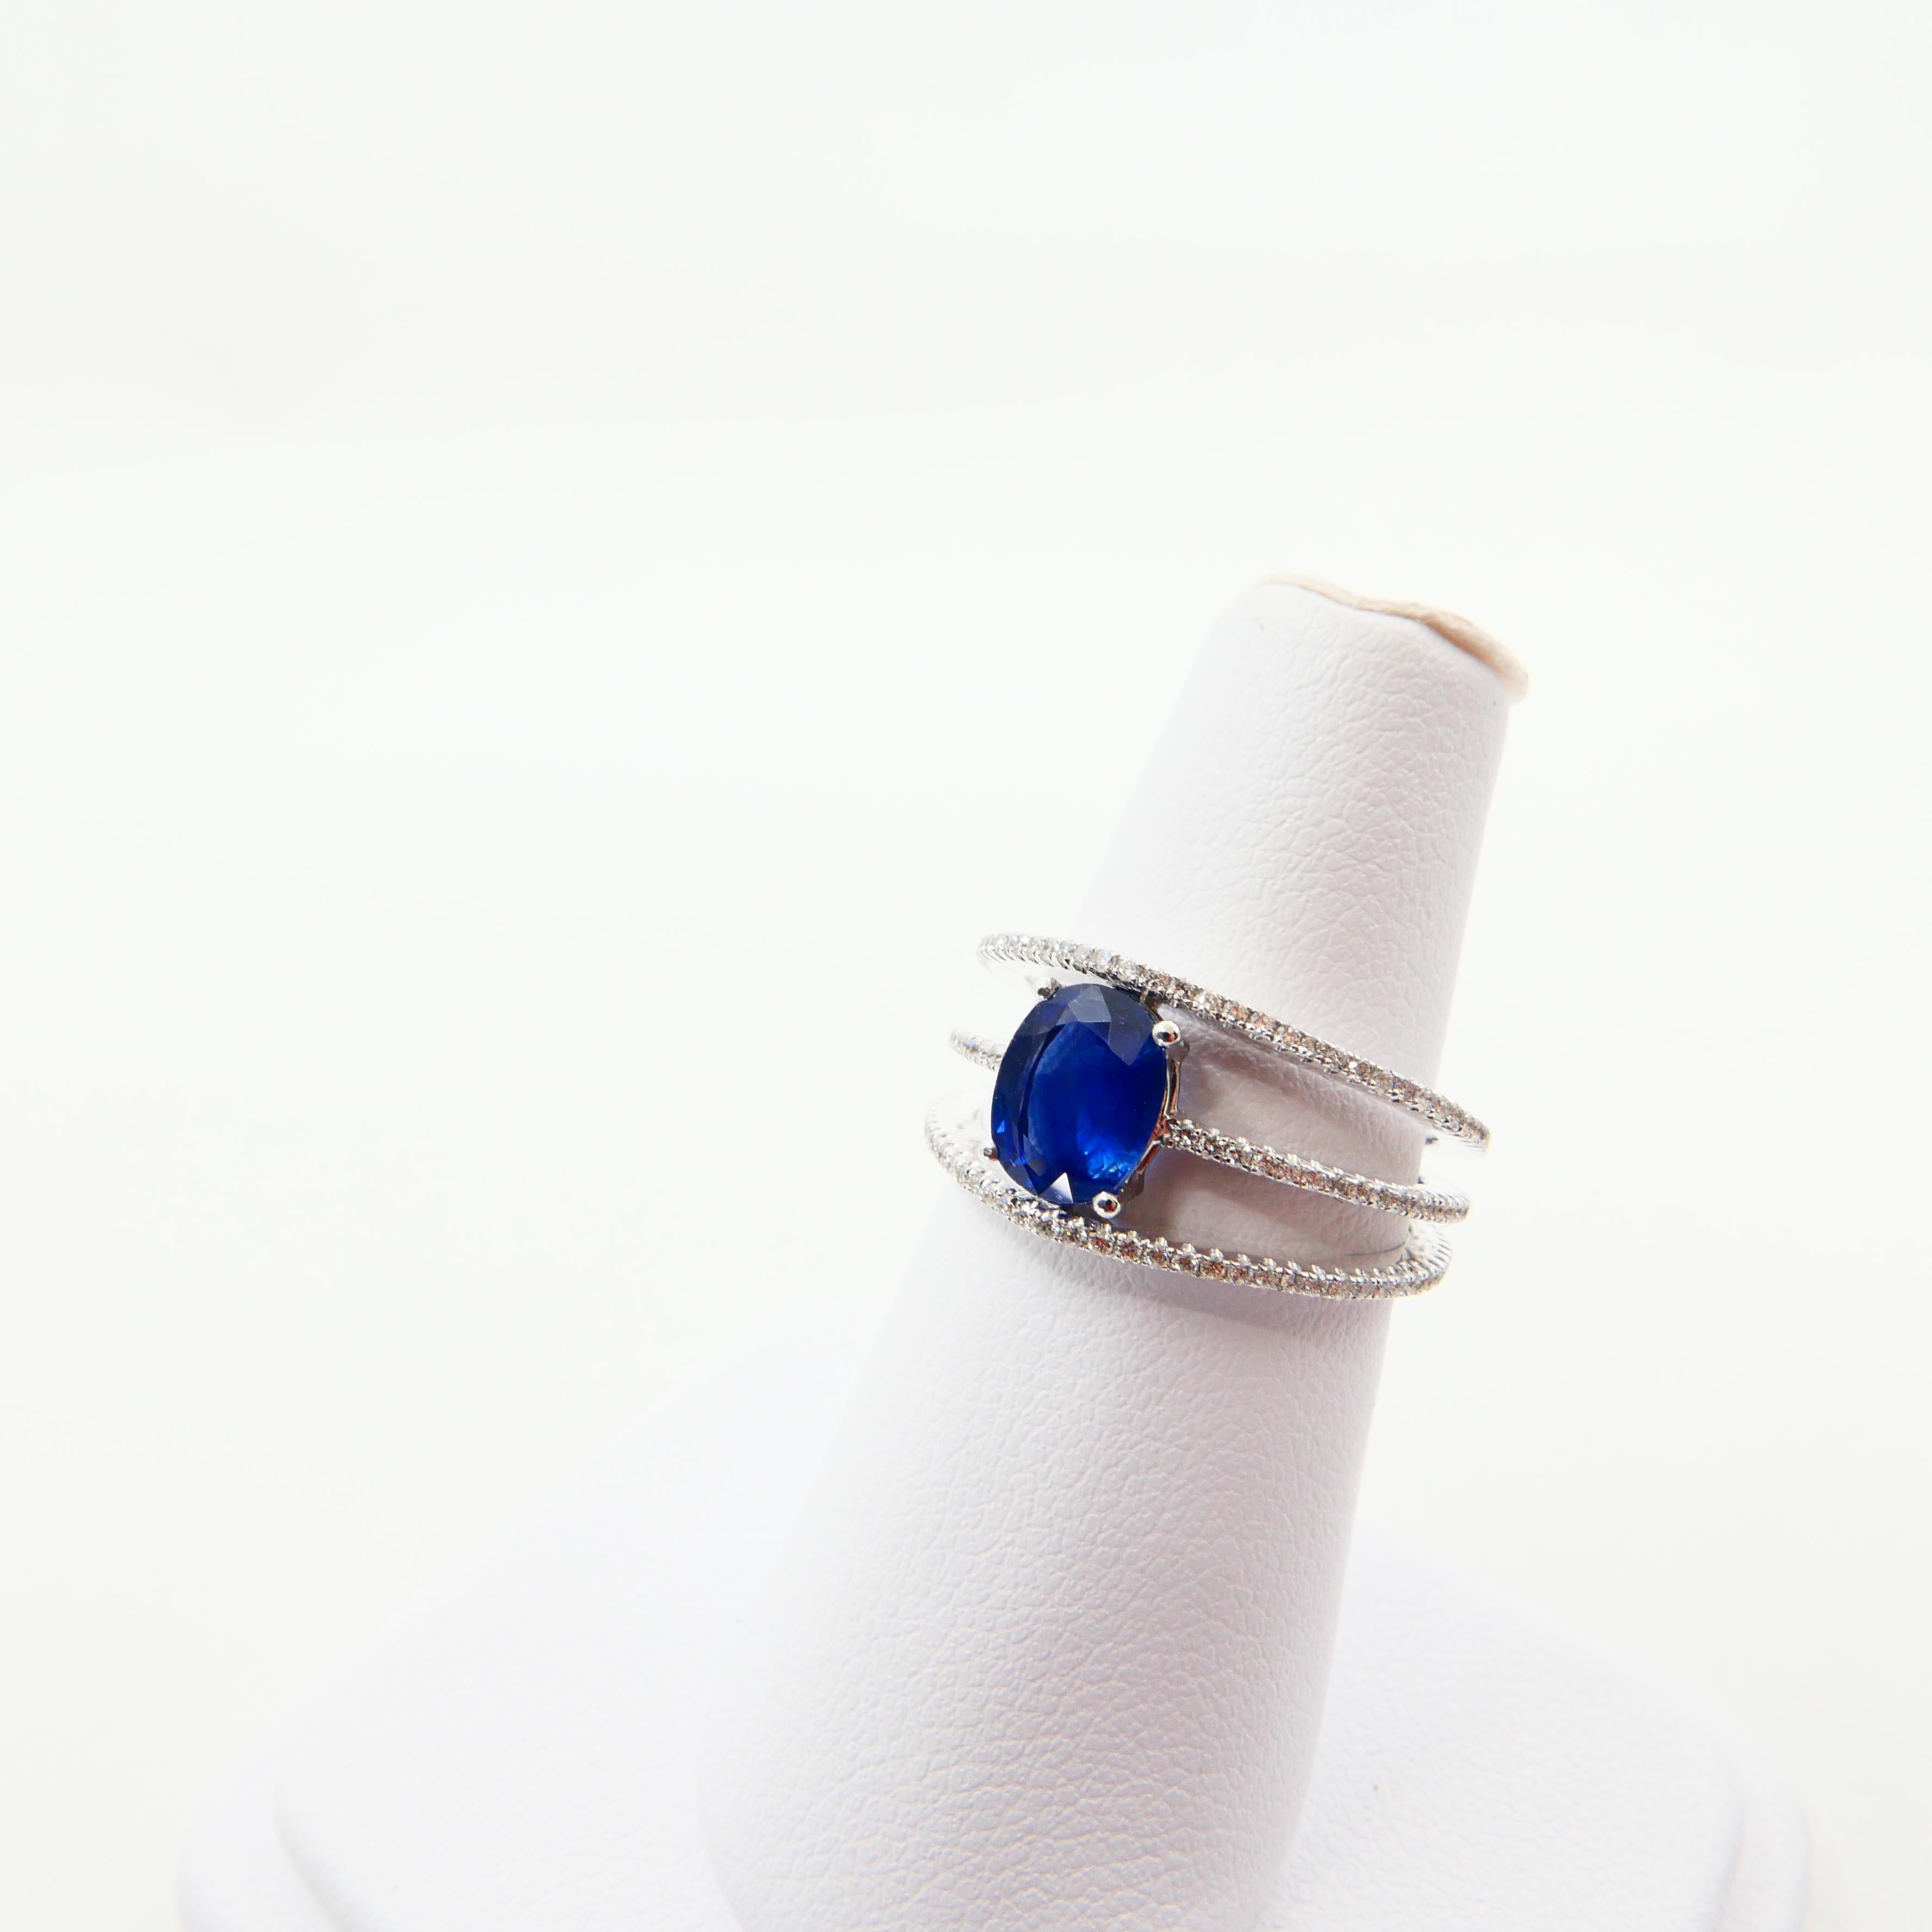 Blue Sapphire and Diamond Cocktail Ring, 3 Rows Design, 18 Karat White Gold For Sale 2